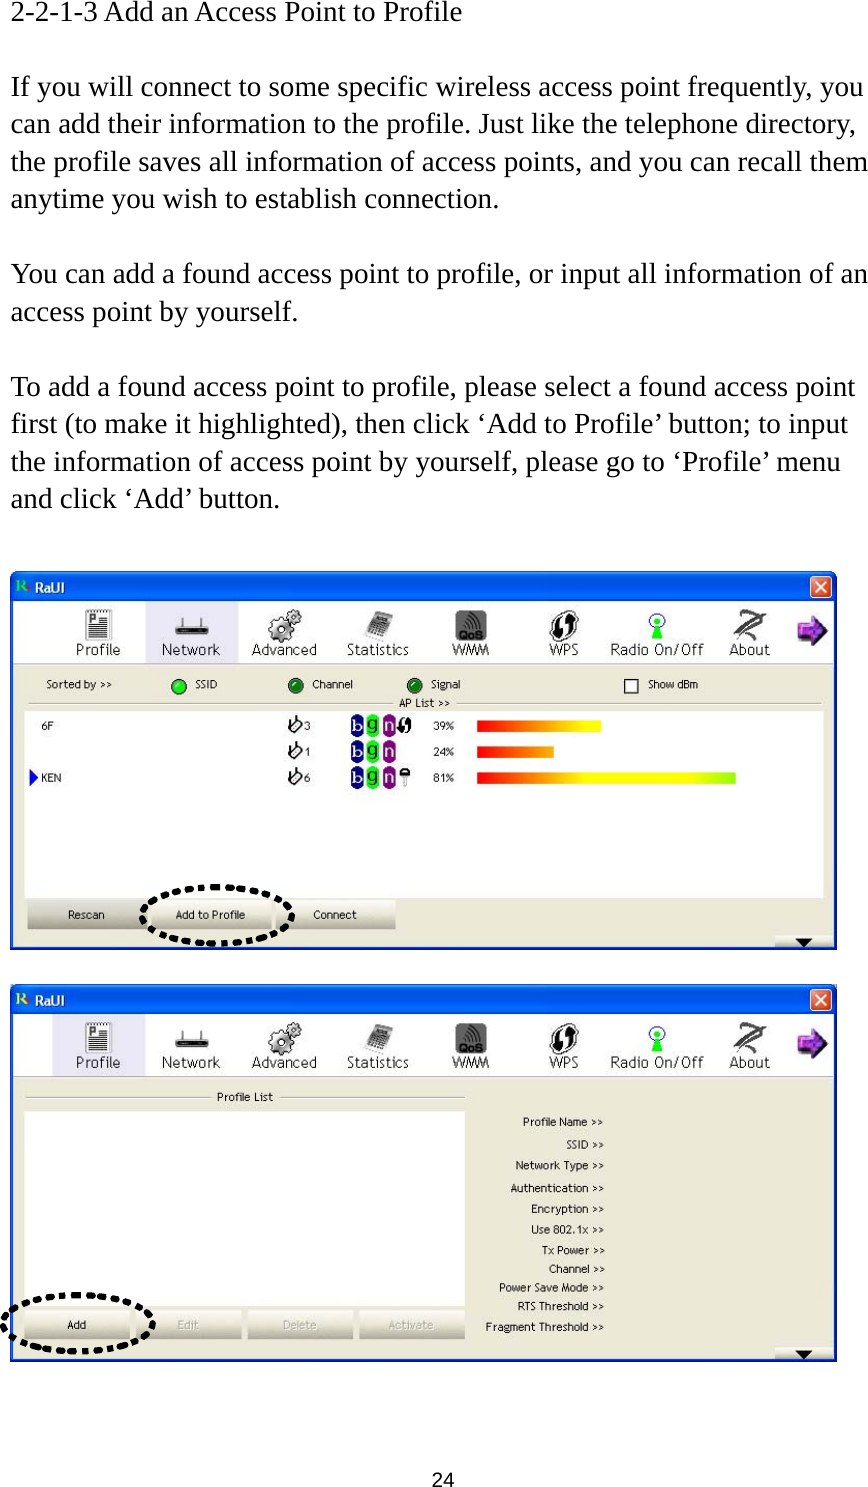  24 2-2-1-3 Add an Access Point to Profile  If you will connect to some specific wireless access point frequently, you can add their information to the profile. Just like the telephone directory, the profile saves all information of access points, and you can recall them anytime you wish to establish connection.  You can add a found access point to profile, or input all information of an access point by yourself.    To add a found access point to profile, please select a found access point first (to make it highlighted), then click ‘Add to Profile’ button; to input the information of access point by yourself, please go to ‘Profile’ menu and click ‘Add’ button.       